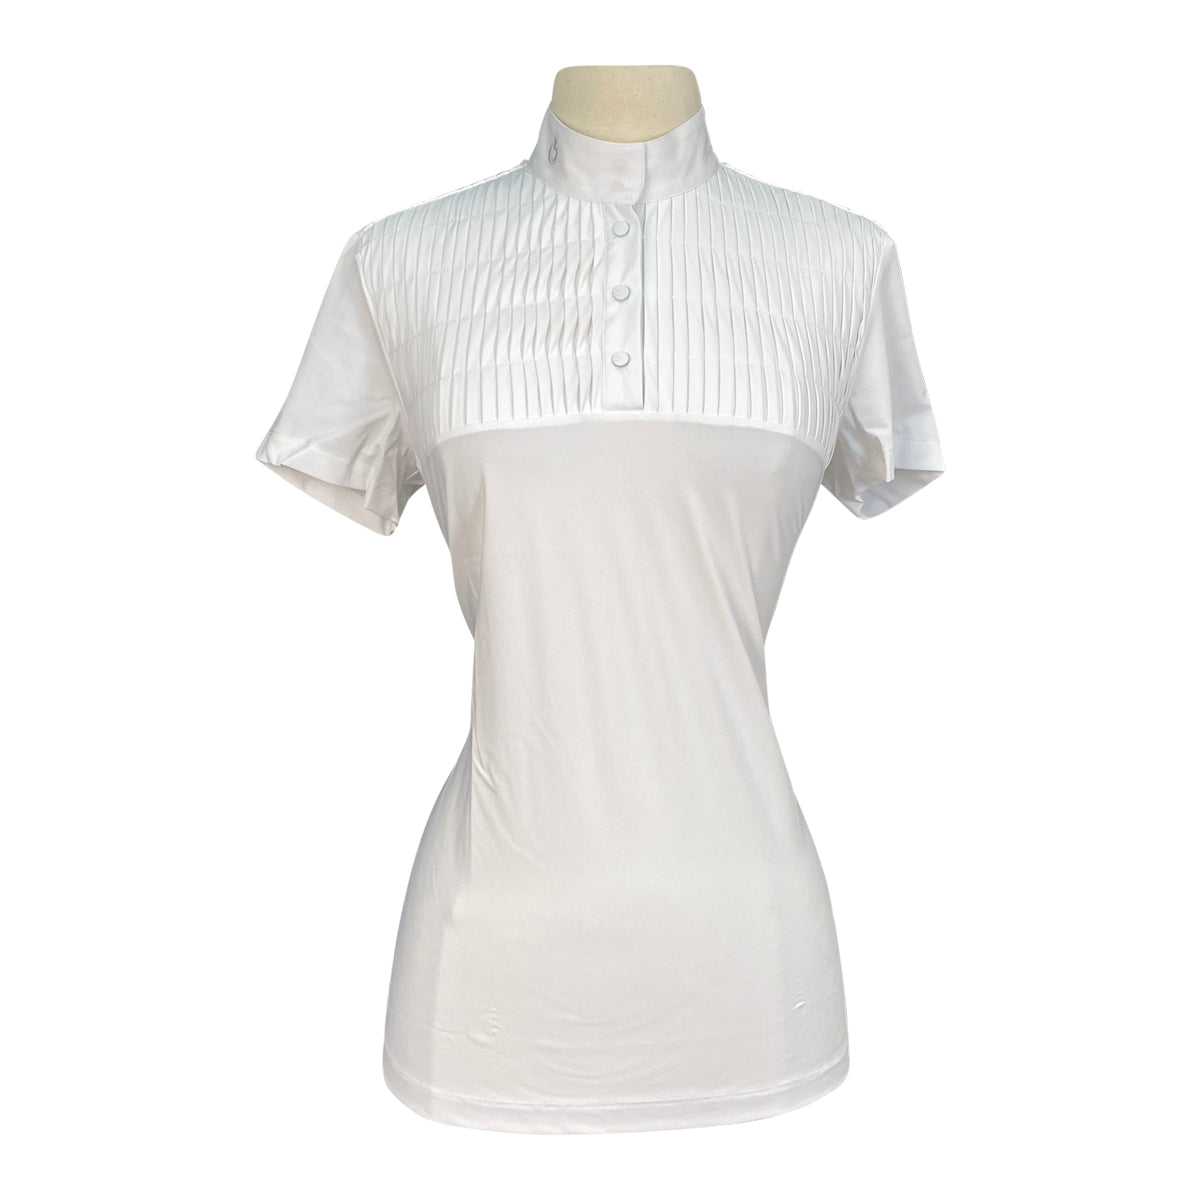 Cavalleria Toscana Jersey S/S Competition Shirt w/Pleated Bib in White